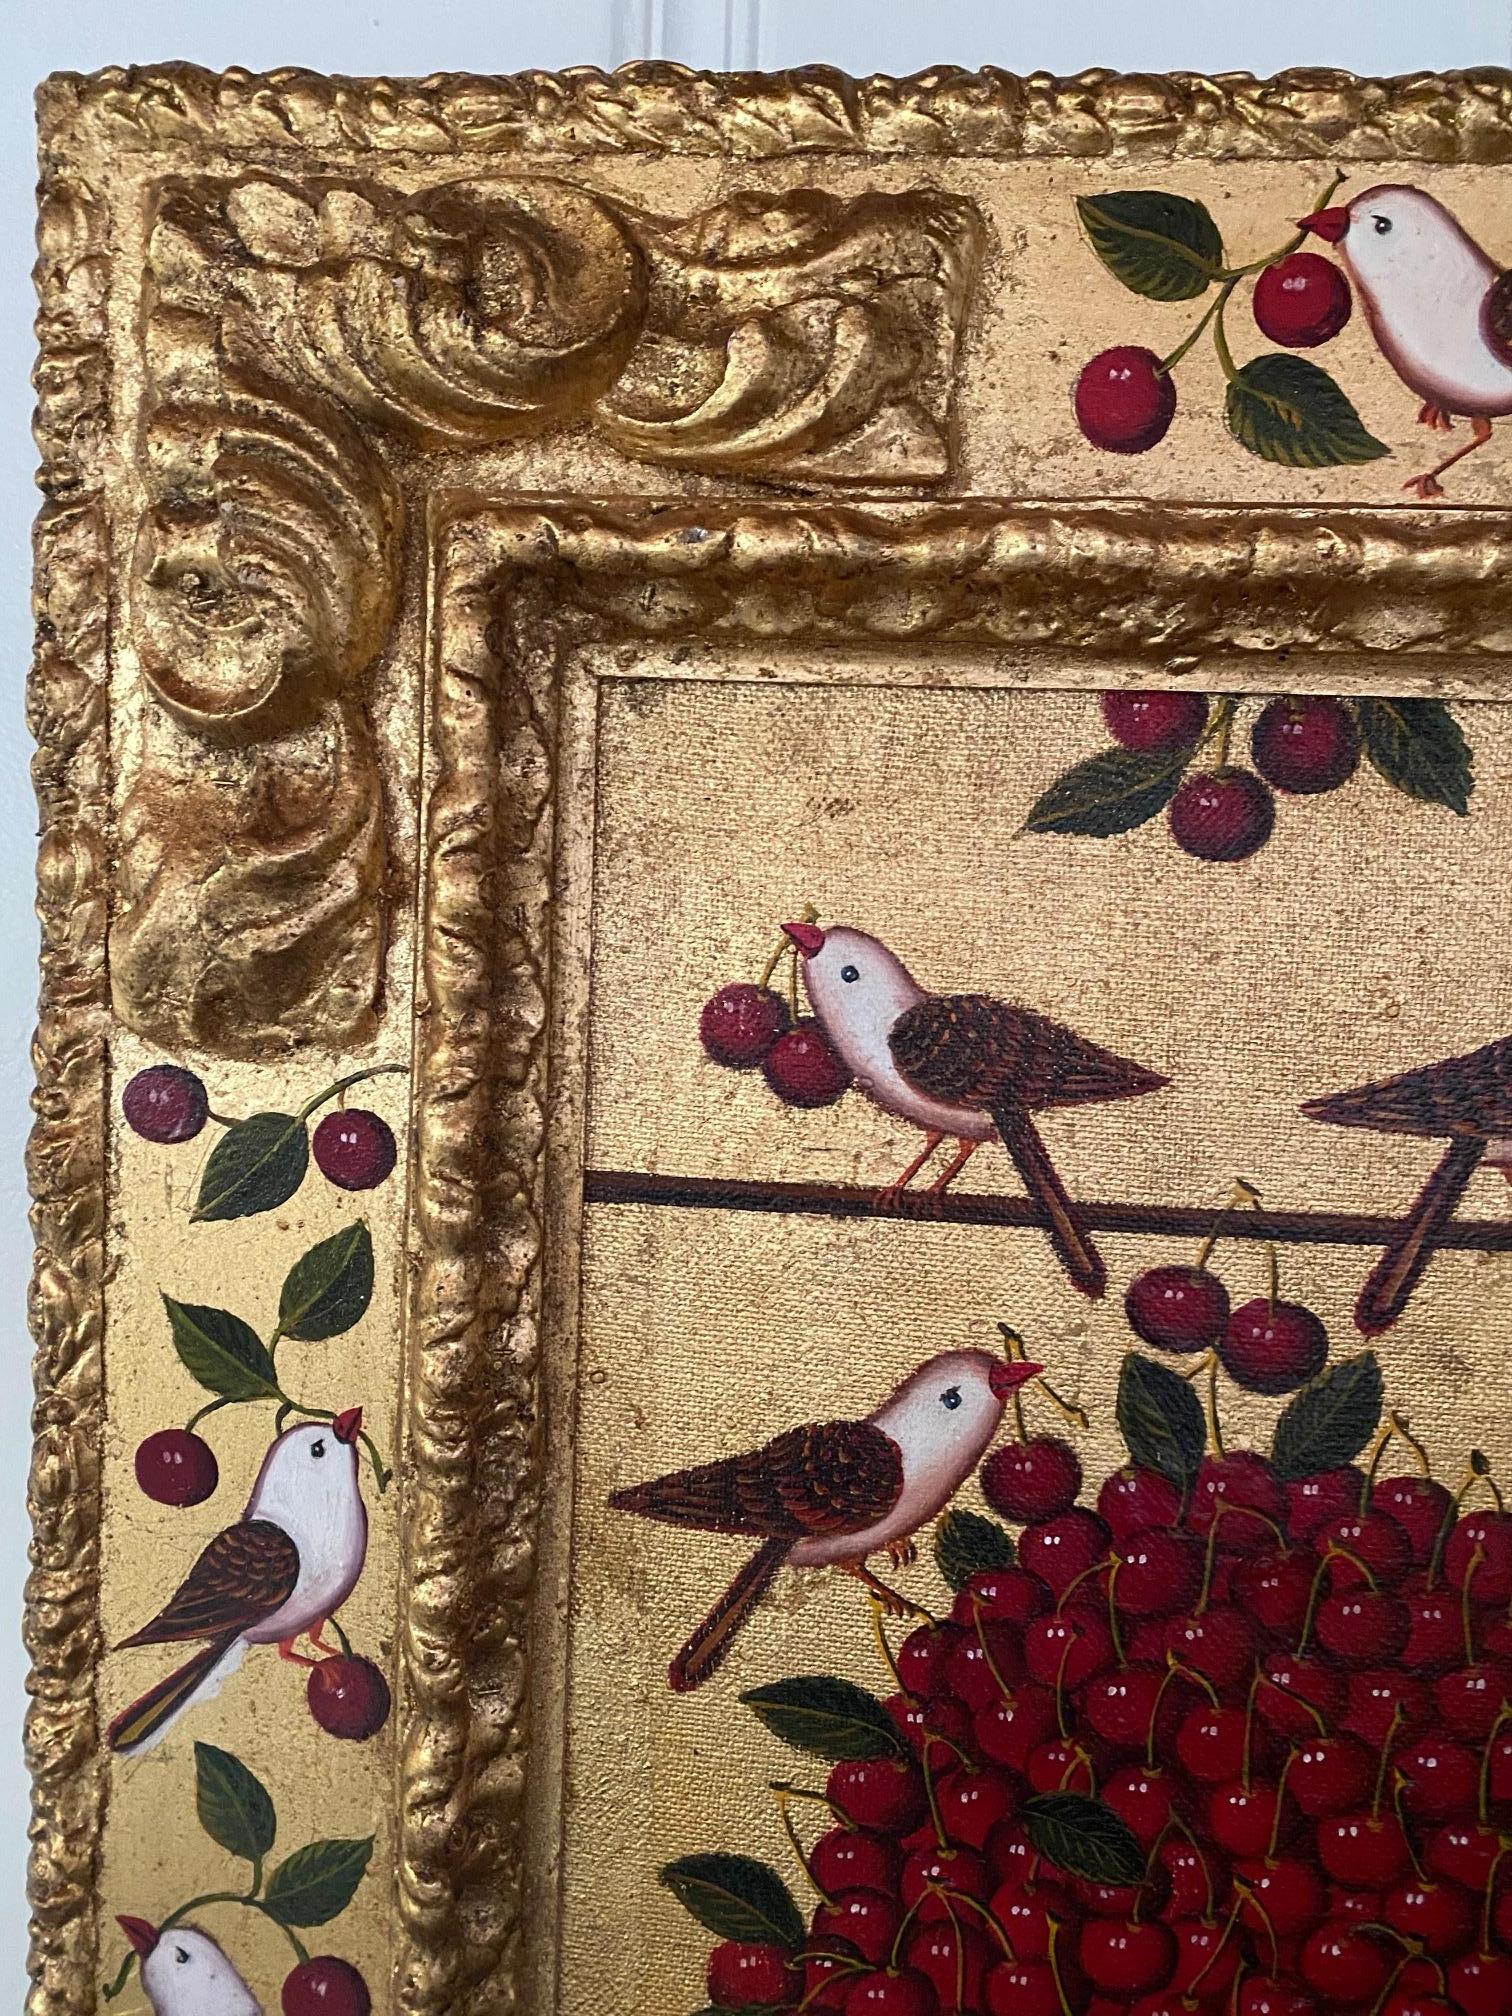 Baroque Still Life with Birds and Cherries, Studio of Miguel Canals